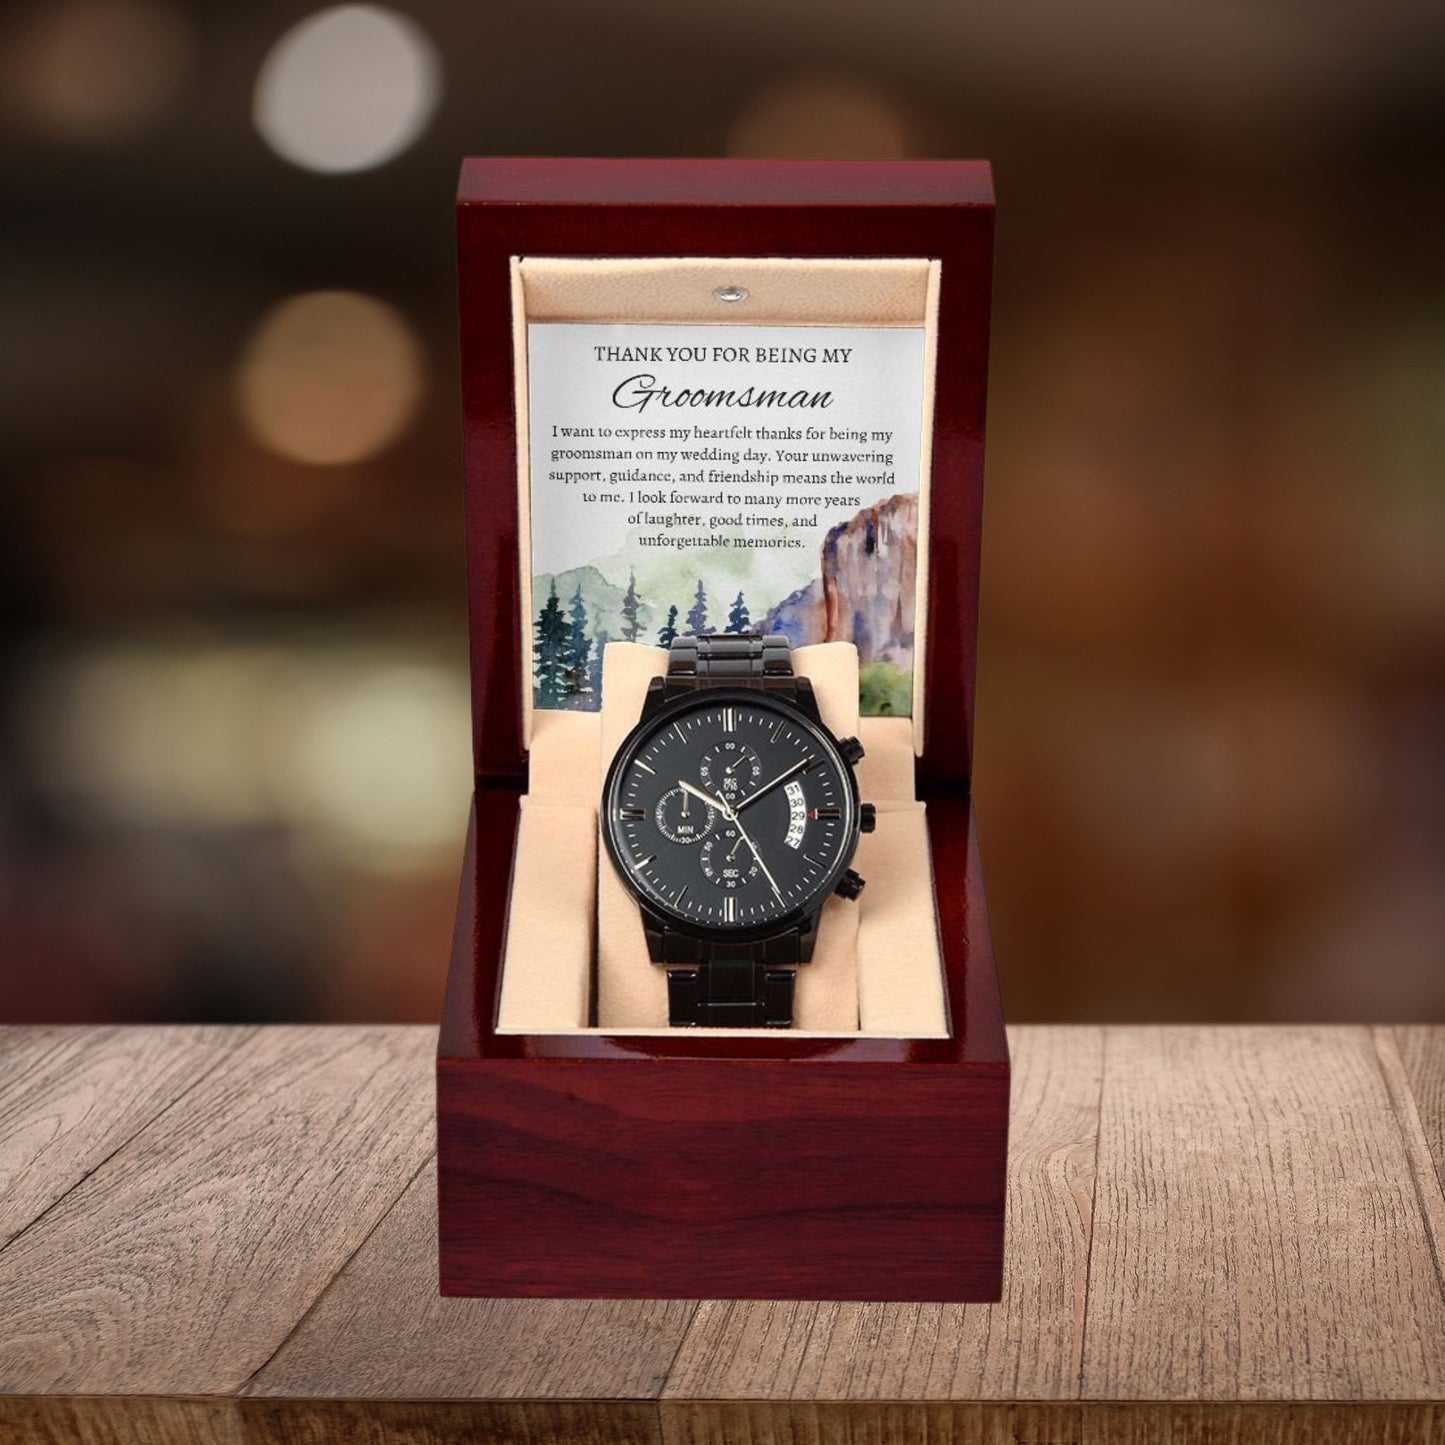 Wedding Party Gift | Best Man Gift Watch | Groomsman Gift Groomsmen Gift | Thank You Gift Bridal Party | Jewelry